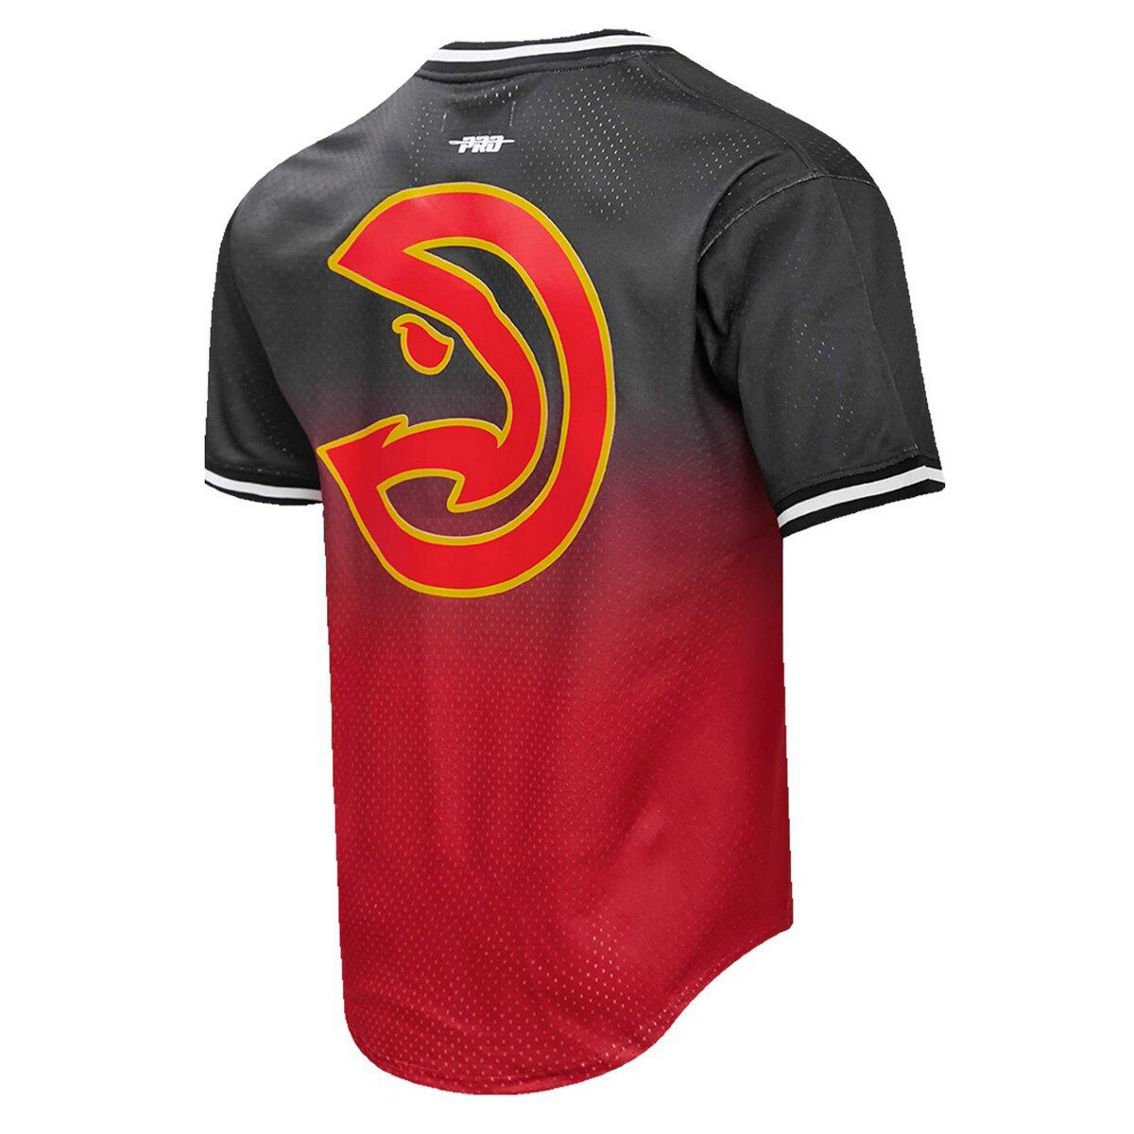 Pro Standard Men's Trae Young Black/Red Atlanta Hawks Ombre Name & Number T-Shirt - Image 4 of 4